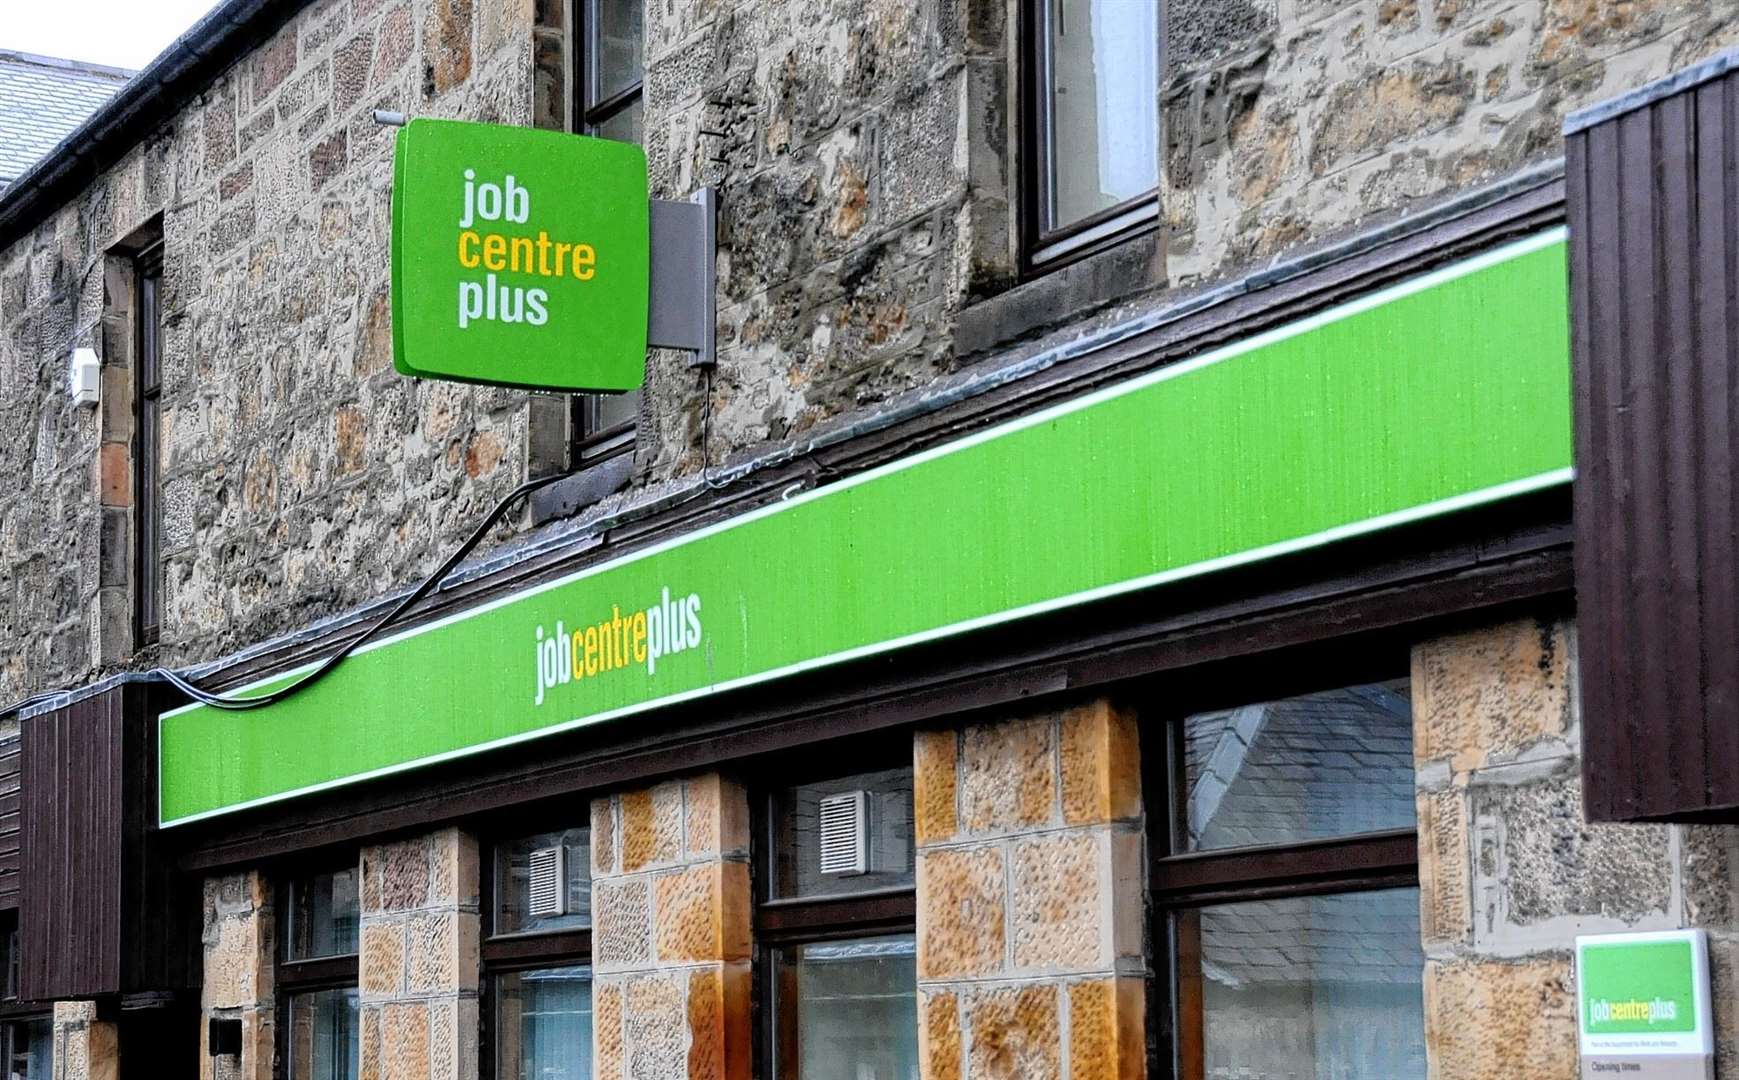 More jobcentre work coaches are among a number of measures to help deal with rising unemployment.